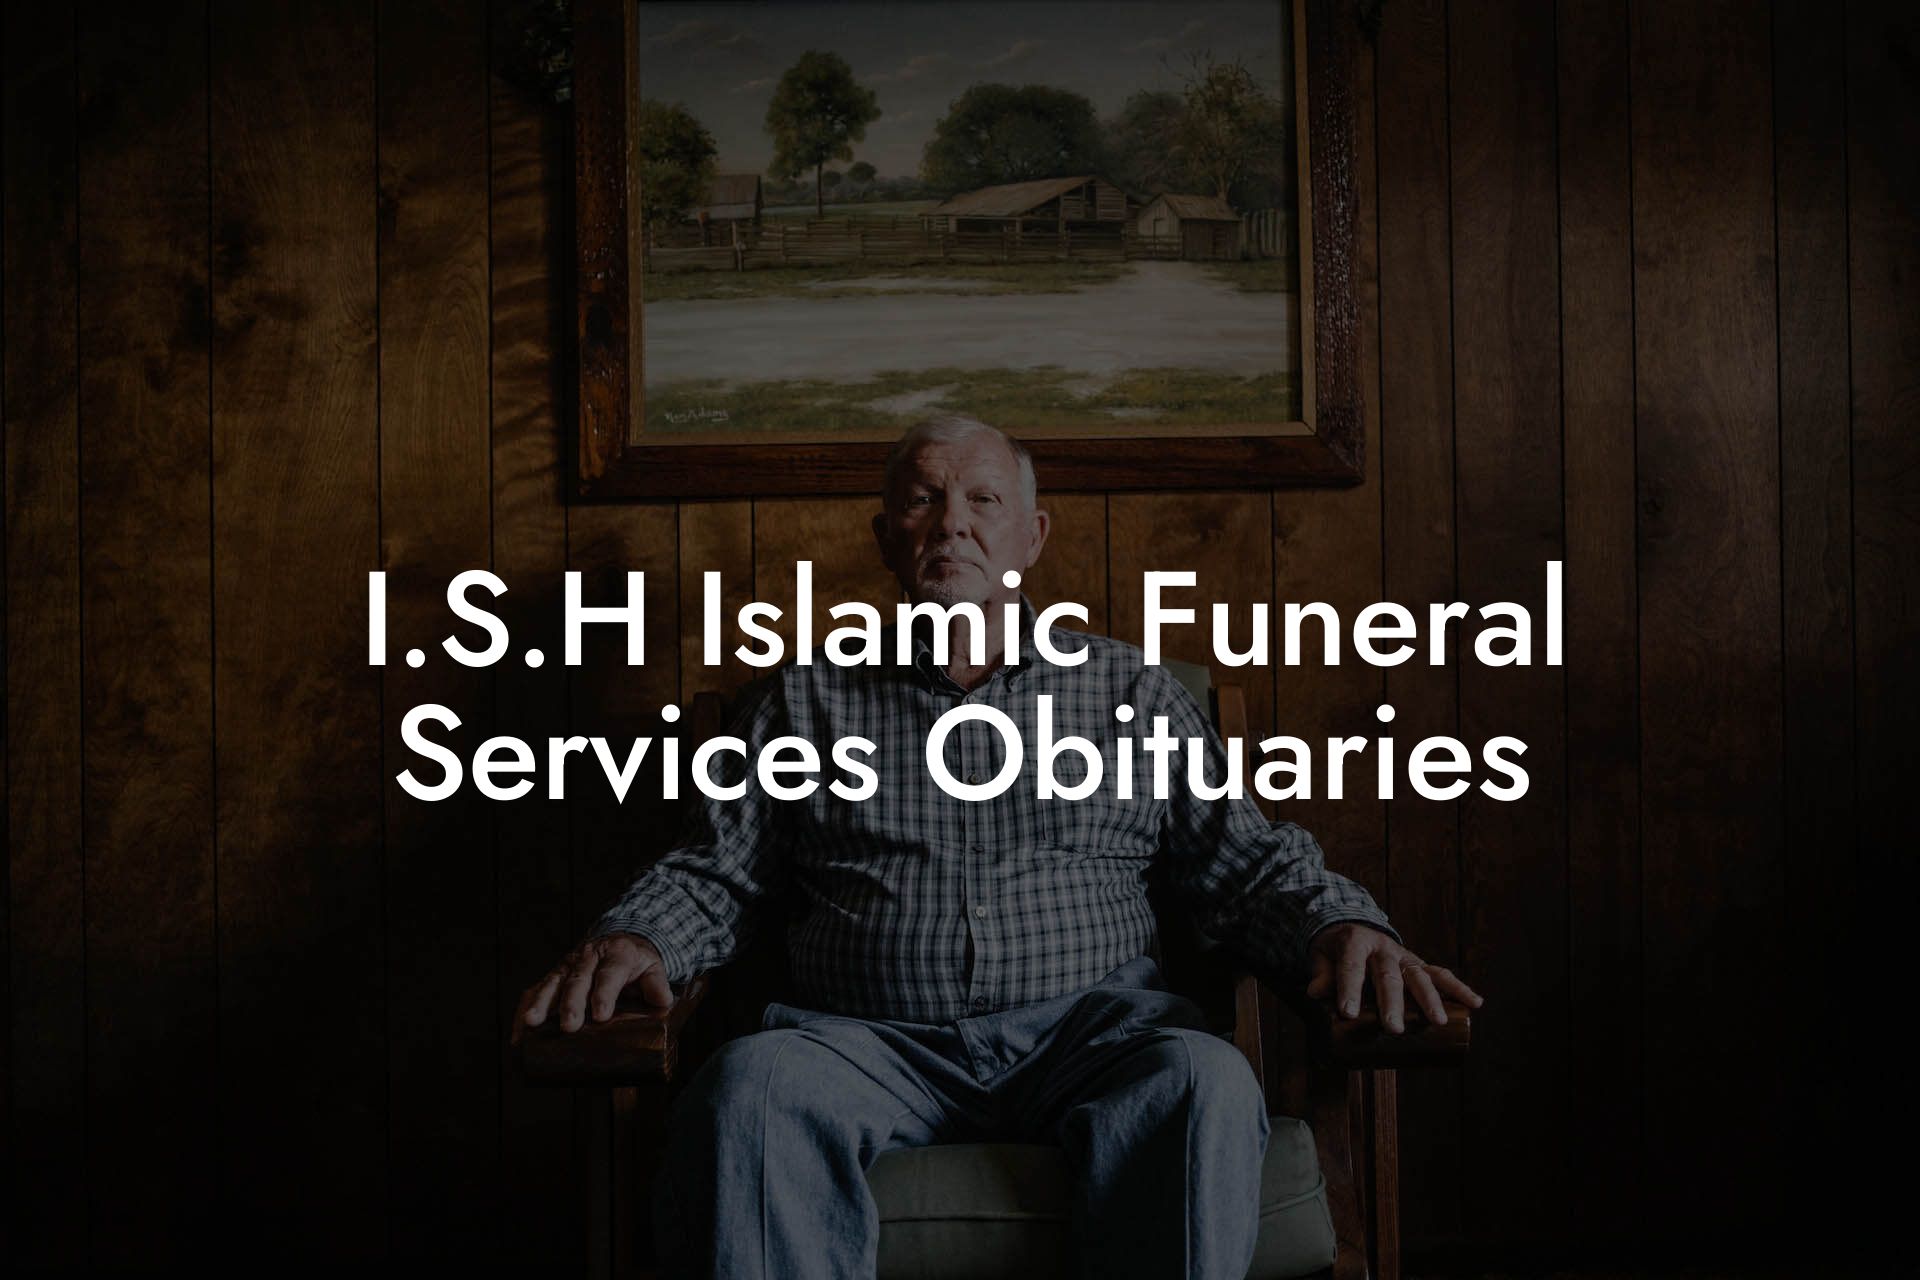 I.S.H Islamic Funeral Services Obituaries